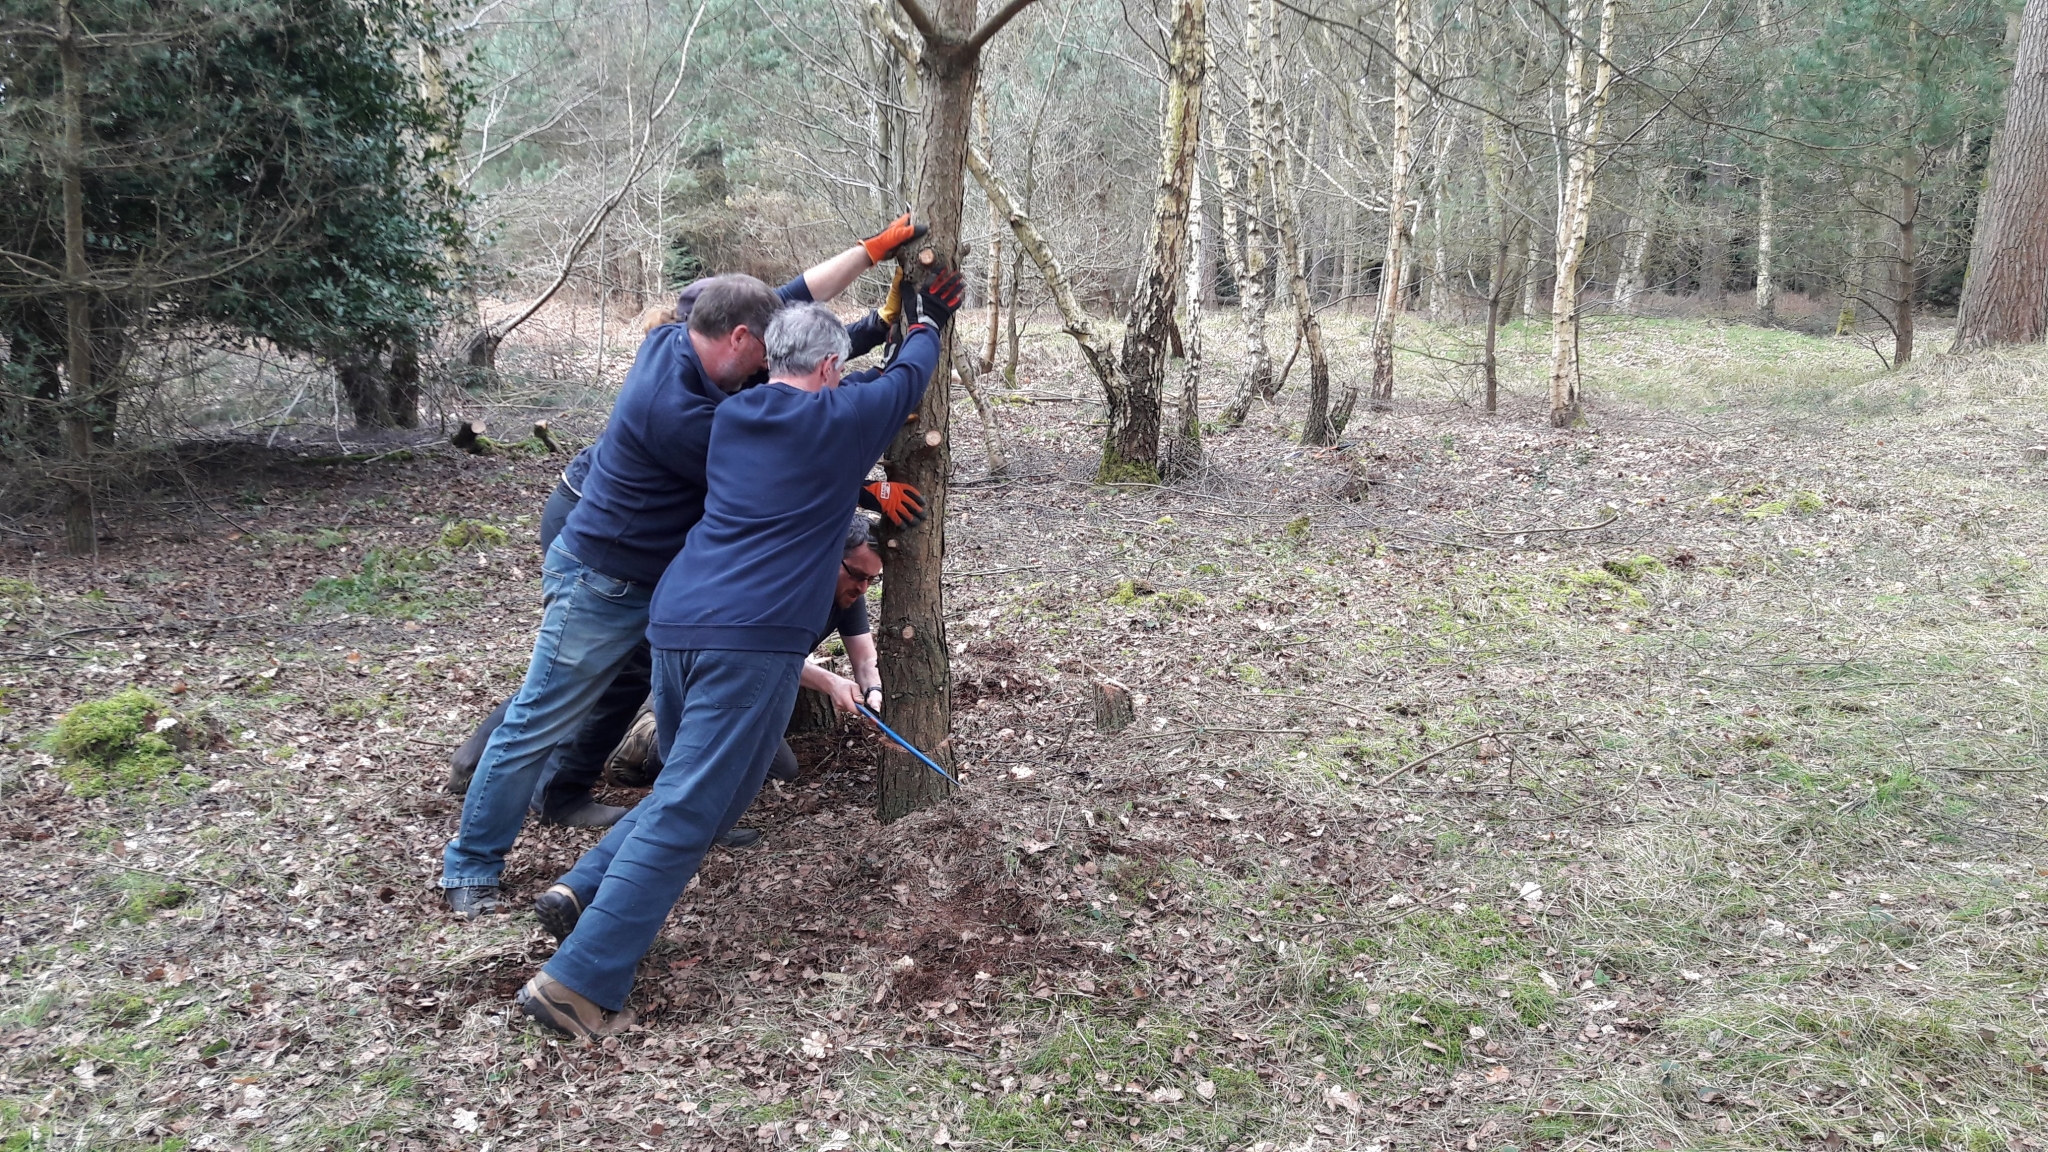 A photo from the FoTF Conservation Event - April 2018 - Improving habitat at High Lodge : Volunteers work to fell a small tree